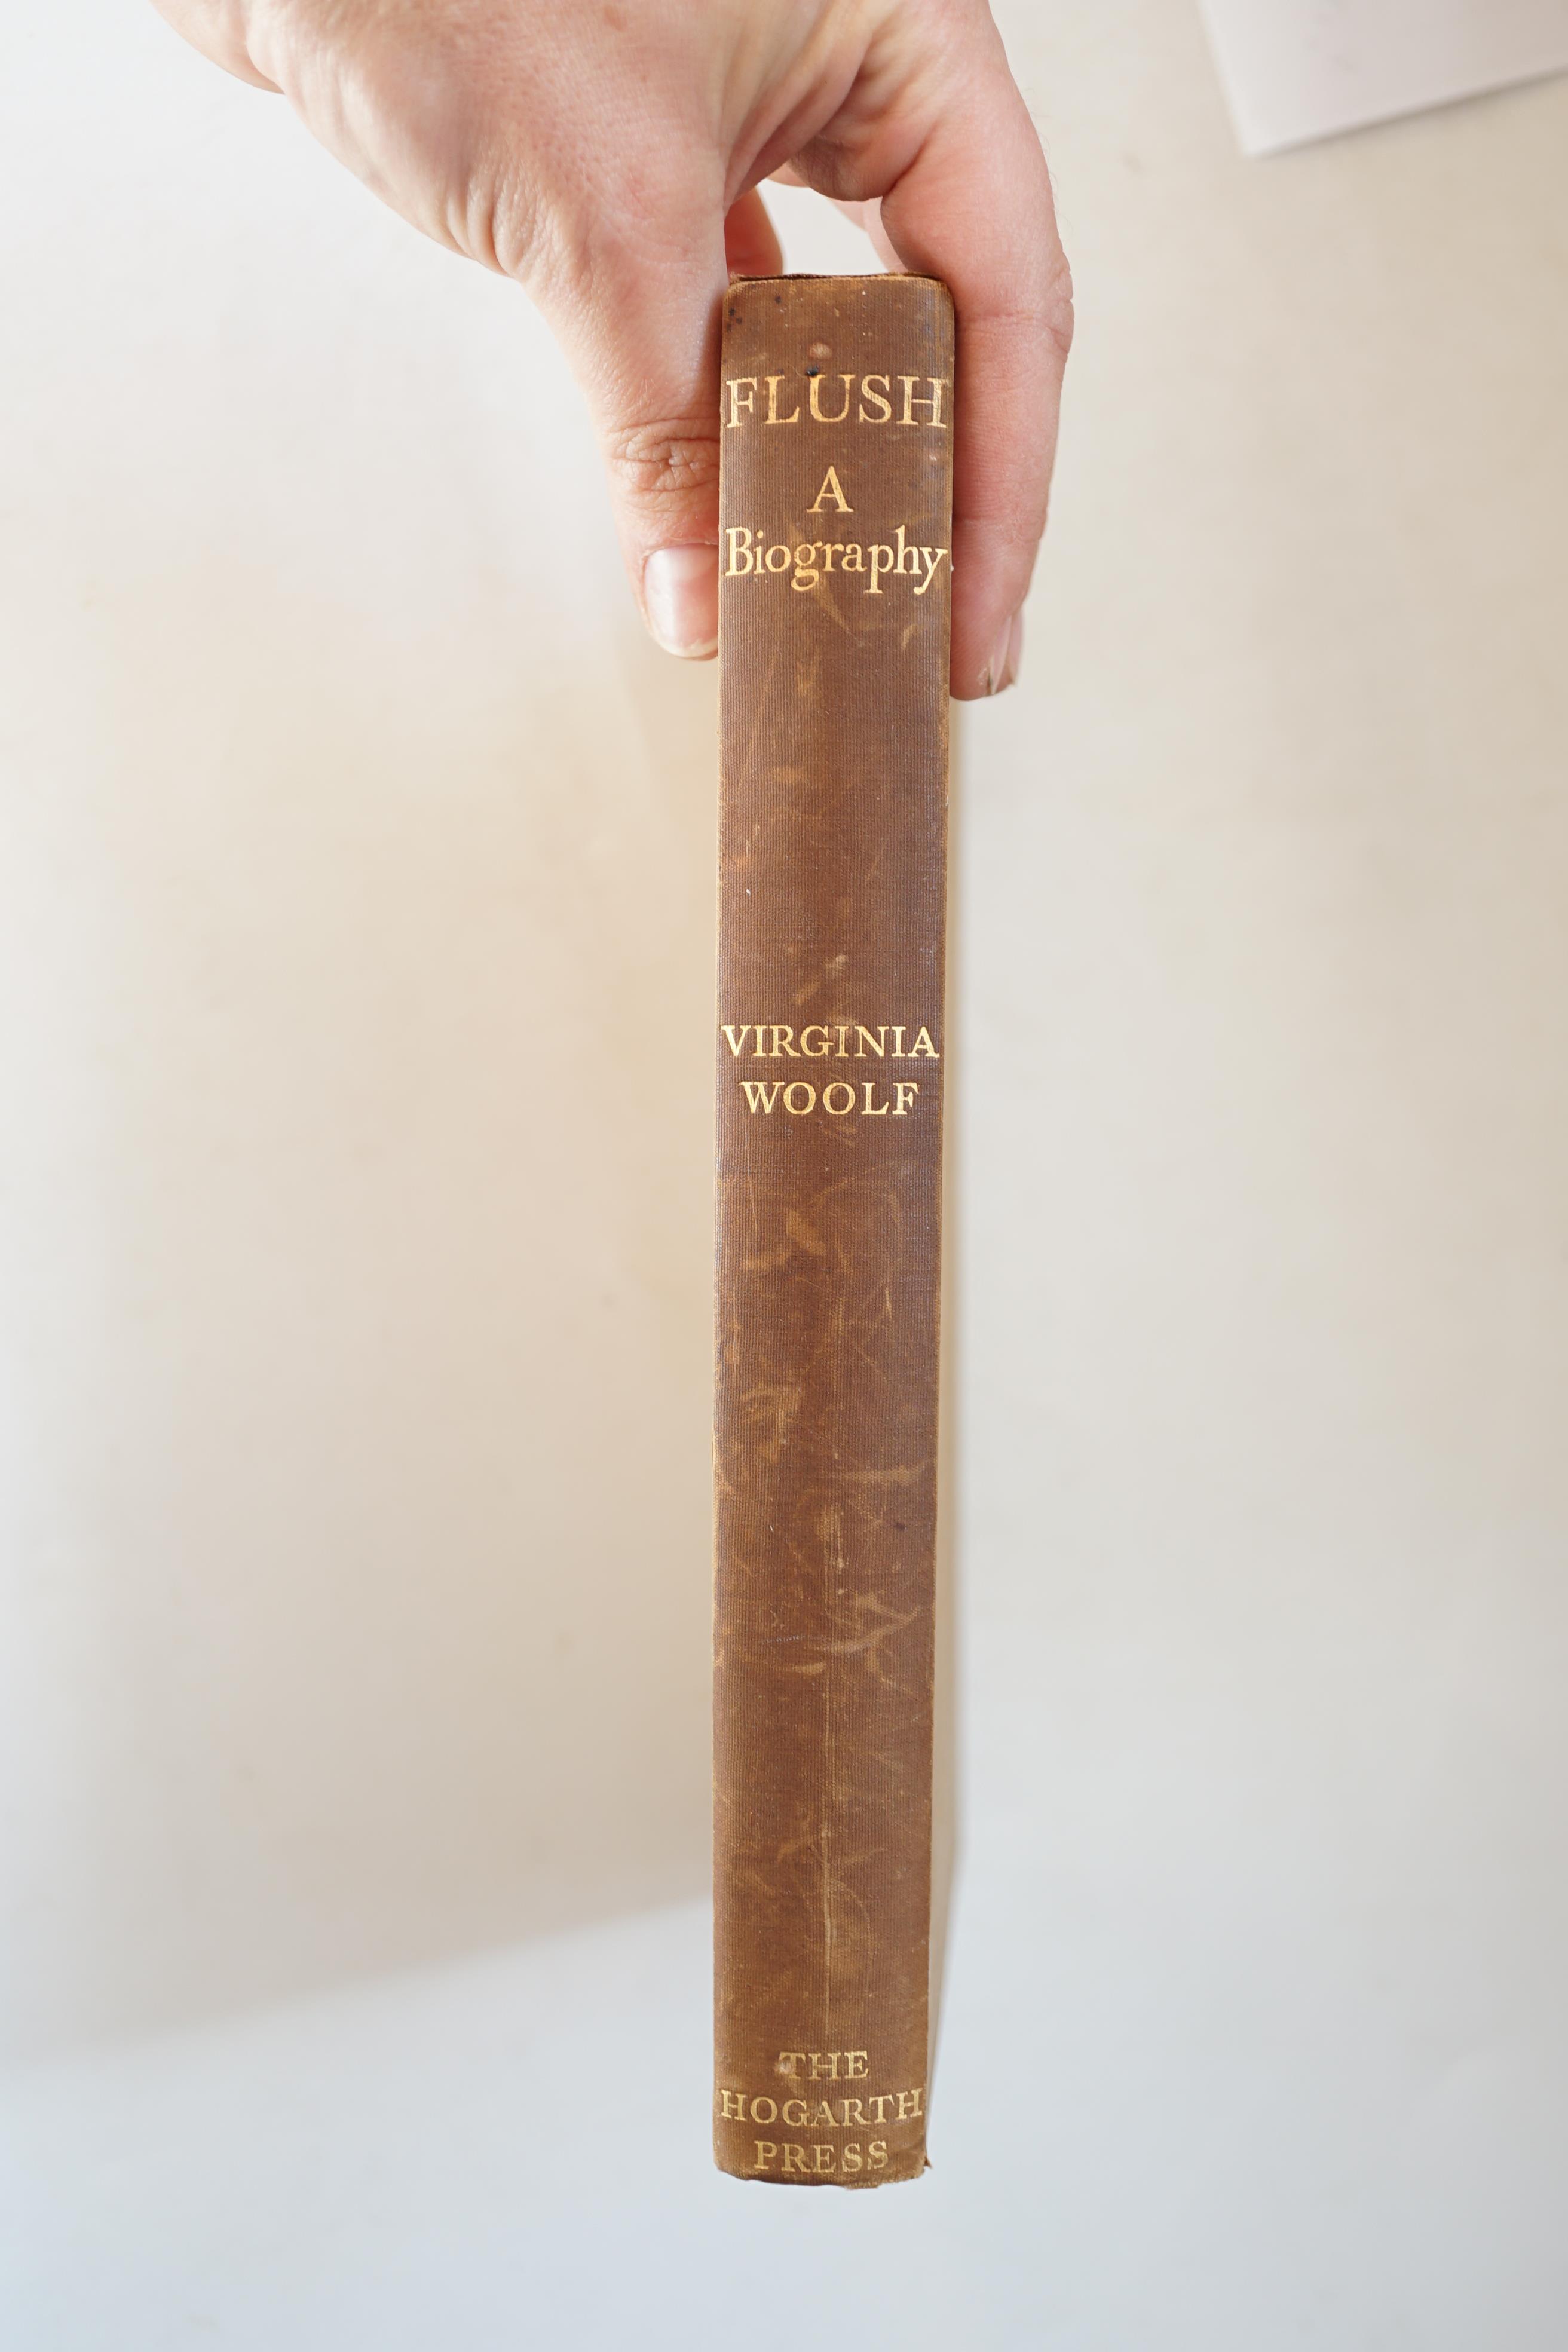 Woolf, Virginia - Flush A Biography, 8vo, cloth, Leonard and Virginia Woolf, Hogarth Press, London, 1933, PROVENANCE: Monks House, Rodmell, Lewes, East Sussex, the home of Virginia Woolf (from 1919-1941) and Leonard Wool